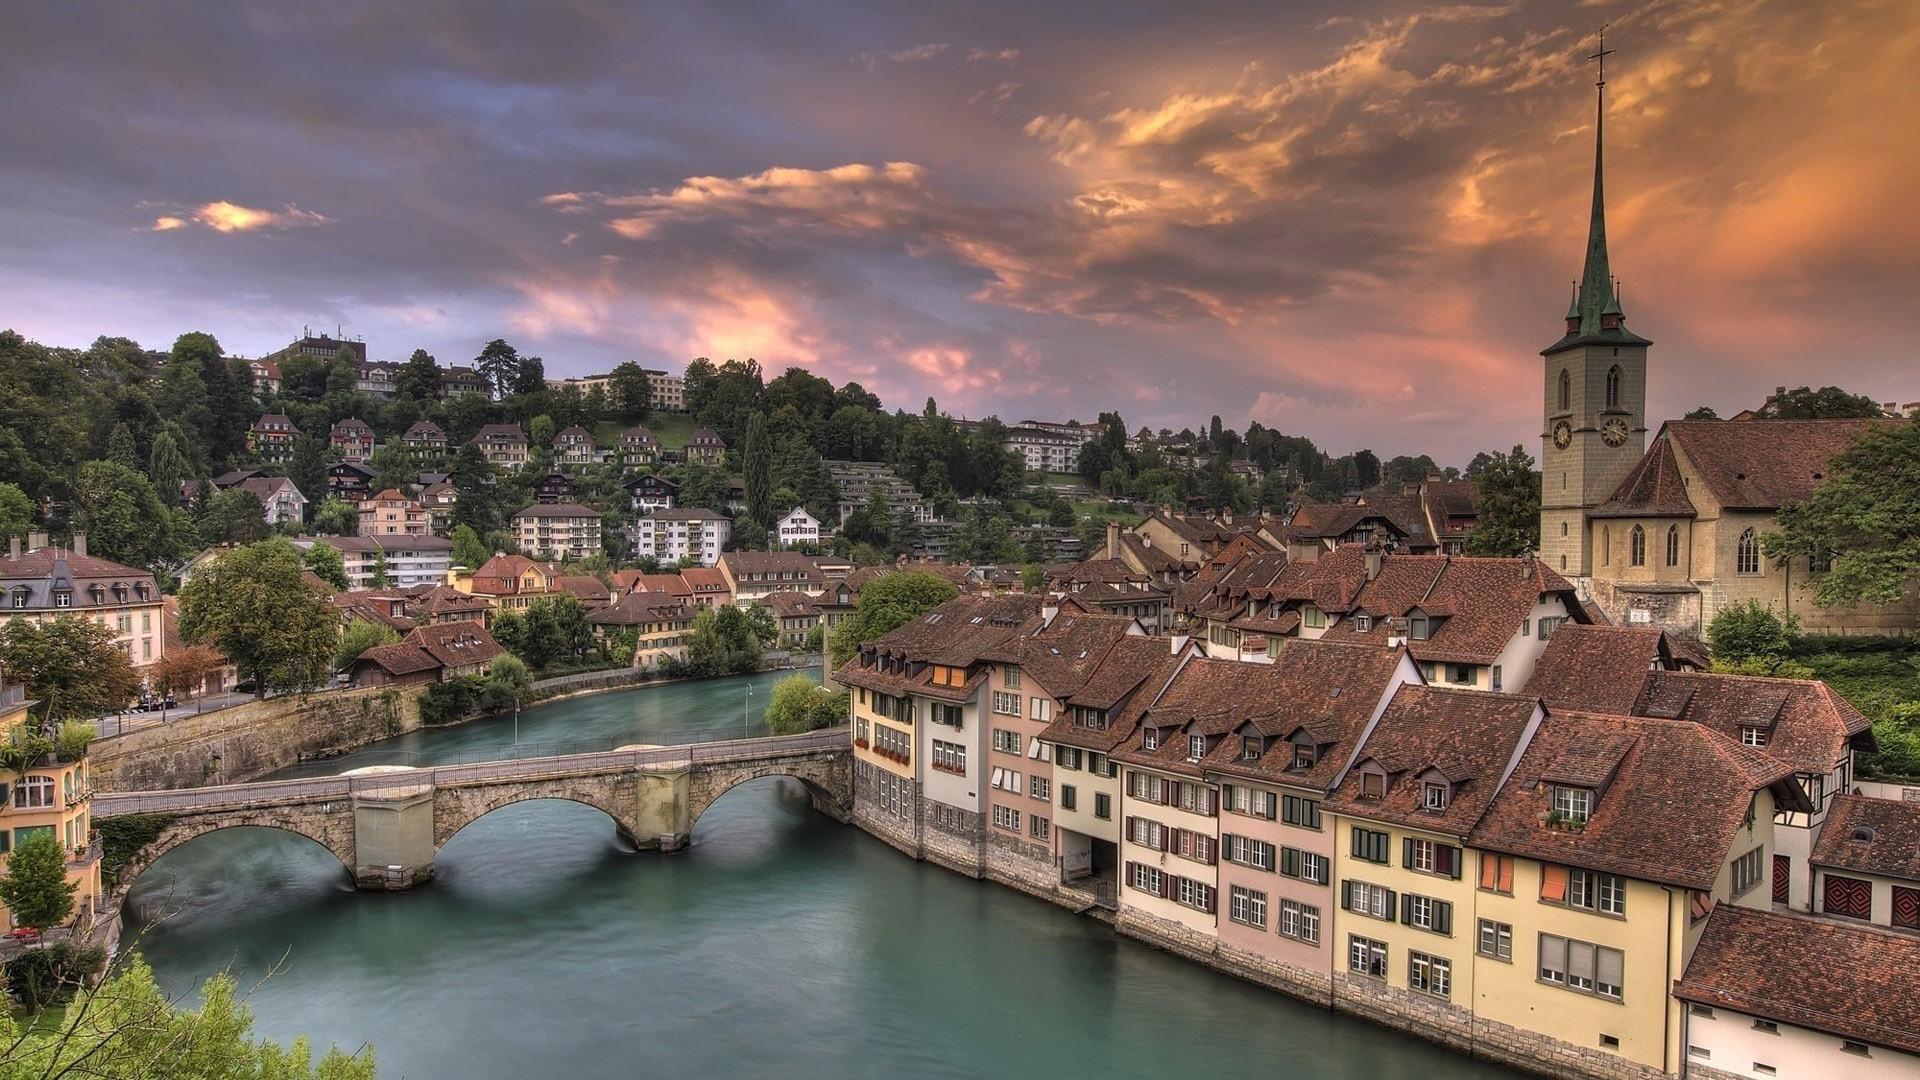 Romantic places to visit in Switzerland this Valentine’s Day